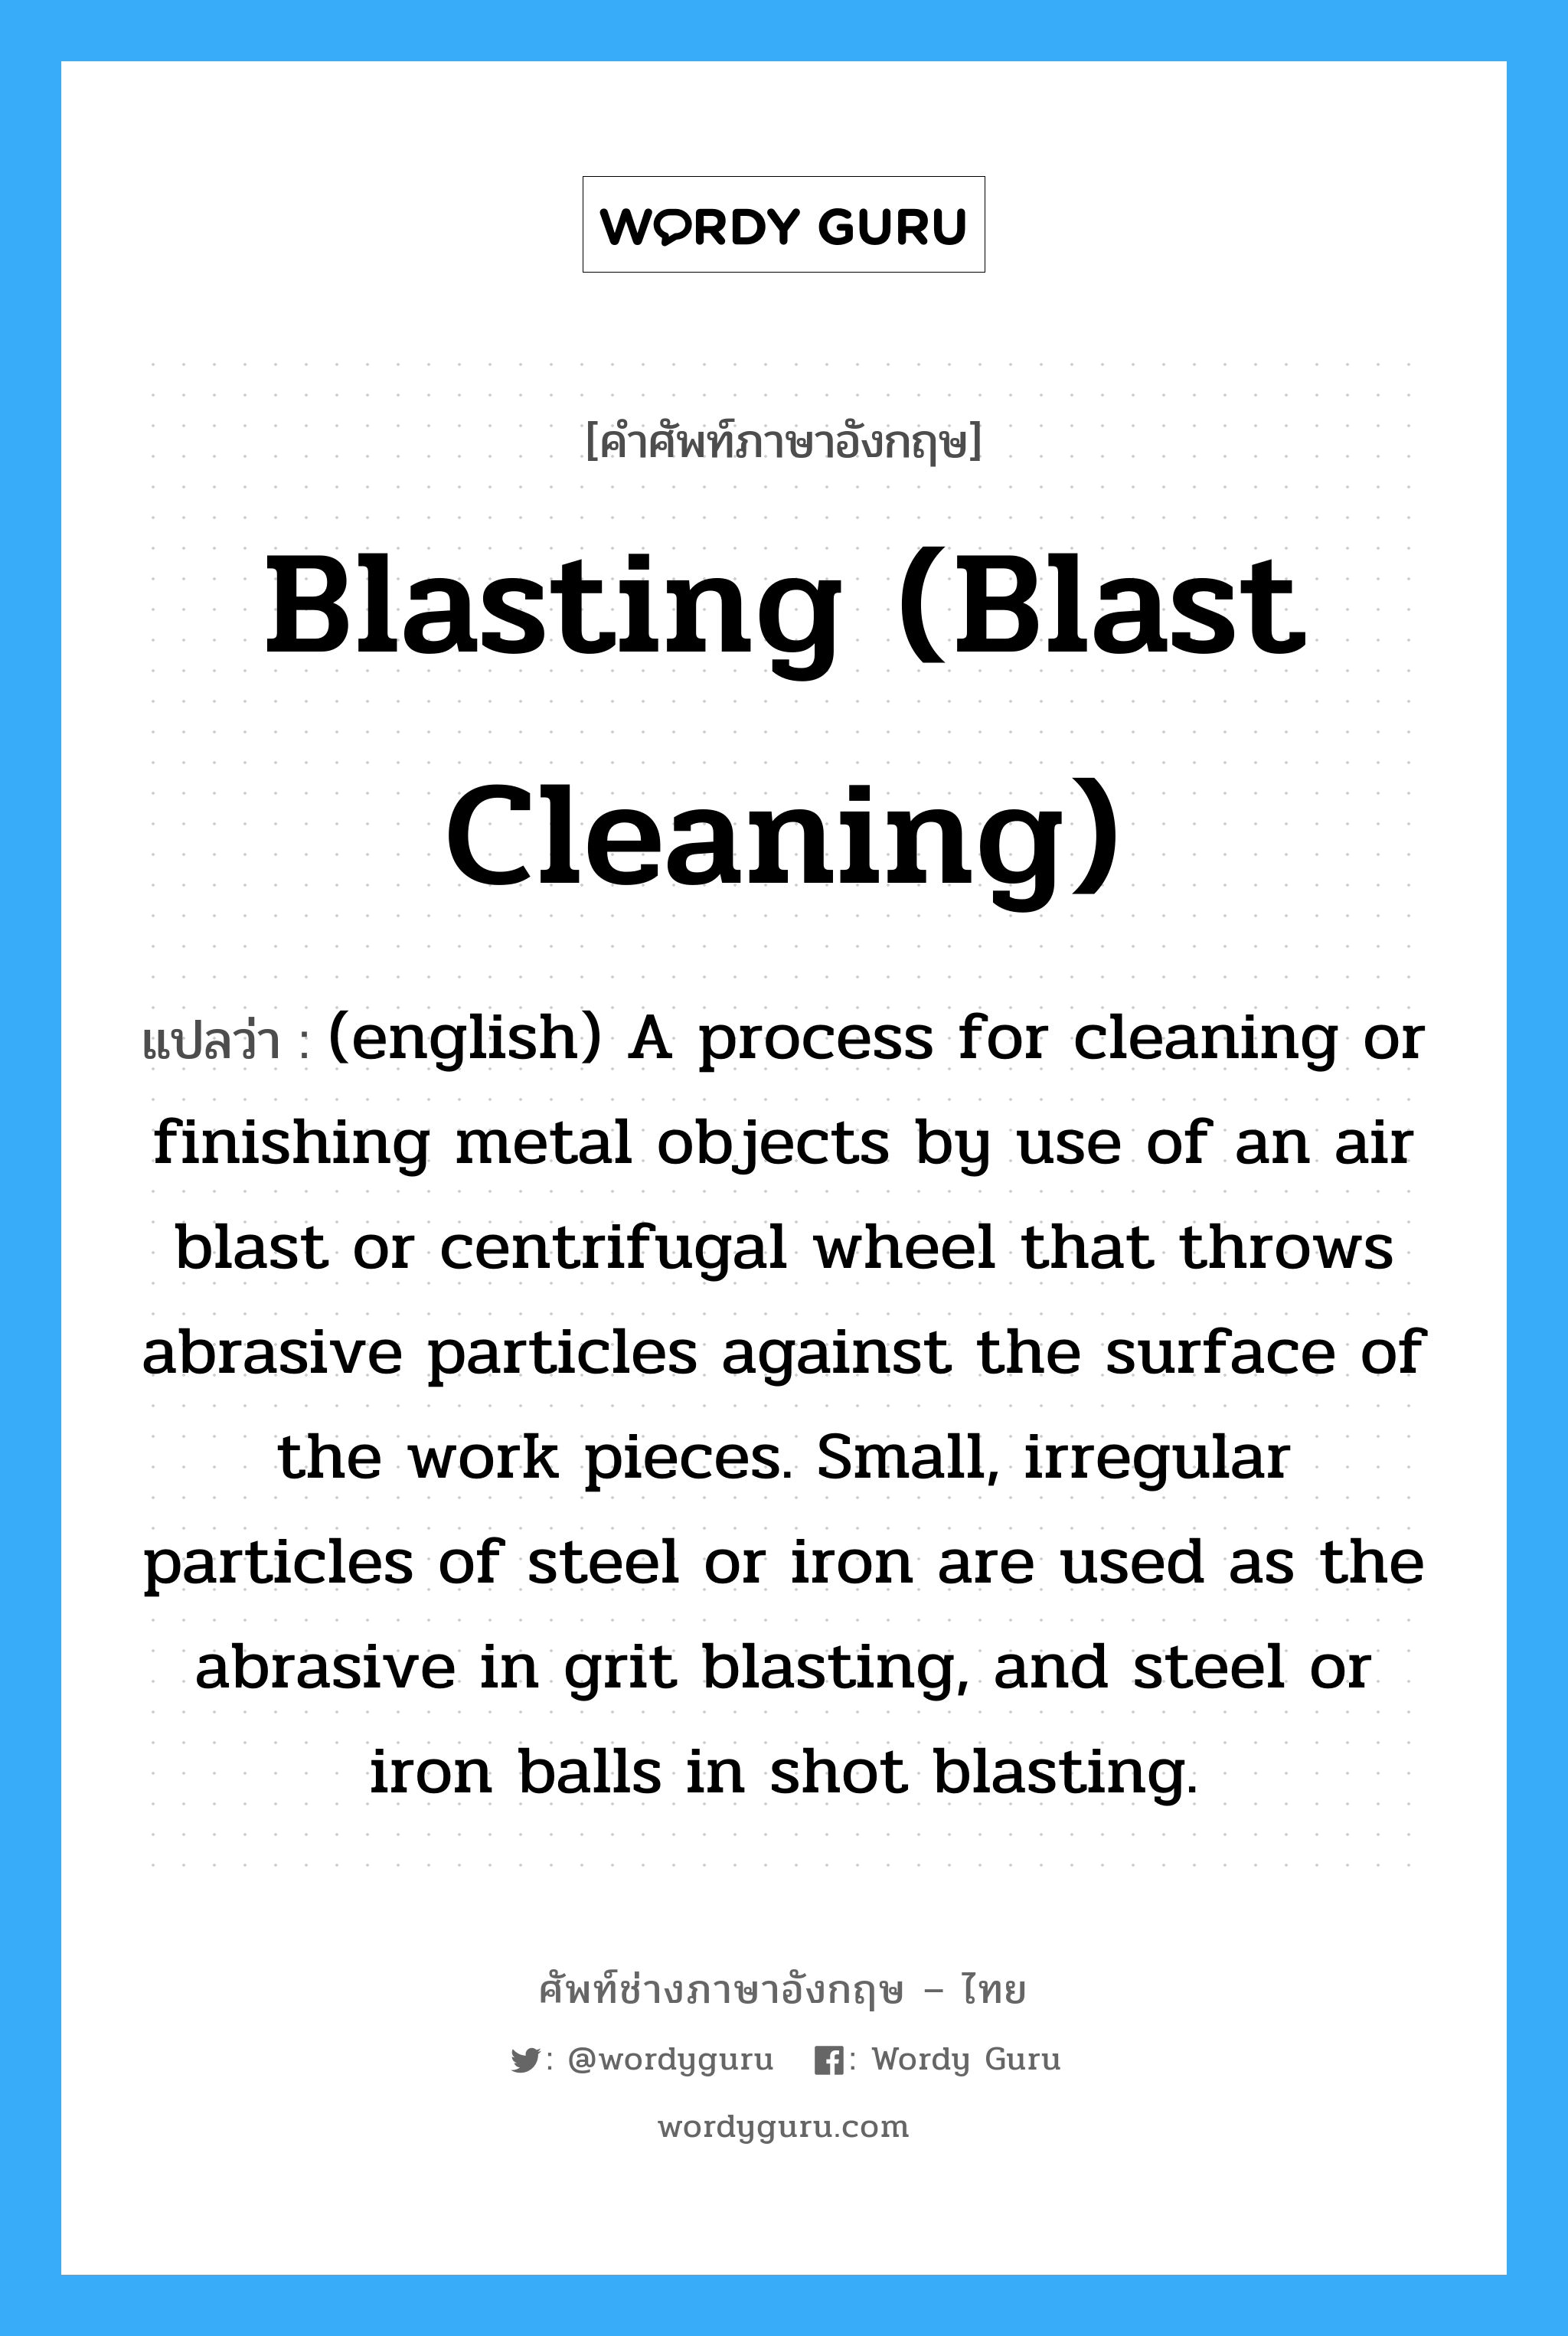 Blasting (Blast Cleaning) แปลว่า?, คำศัพท์ช่างภาษาอังกฤษ - ไทย Blasting (Blast Cleaning) คำศัพท์ภาษาอังกฤษ Blasting (Blast Cleaning) แปลว่า (english) A process for cleaning or finishing metal objects by use of an air blast or centrifugal wheel that throws abrasive particles against the surface of the work pieces. Small, irregular particles of steel or iron are used as the abrasive in grit blasting, and steel or iron balls in shot blasting.